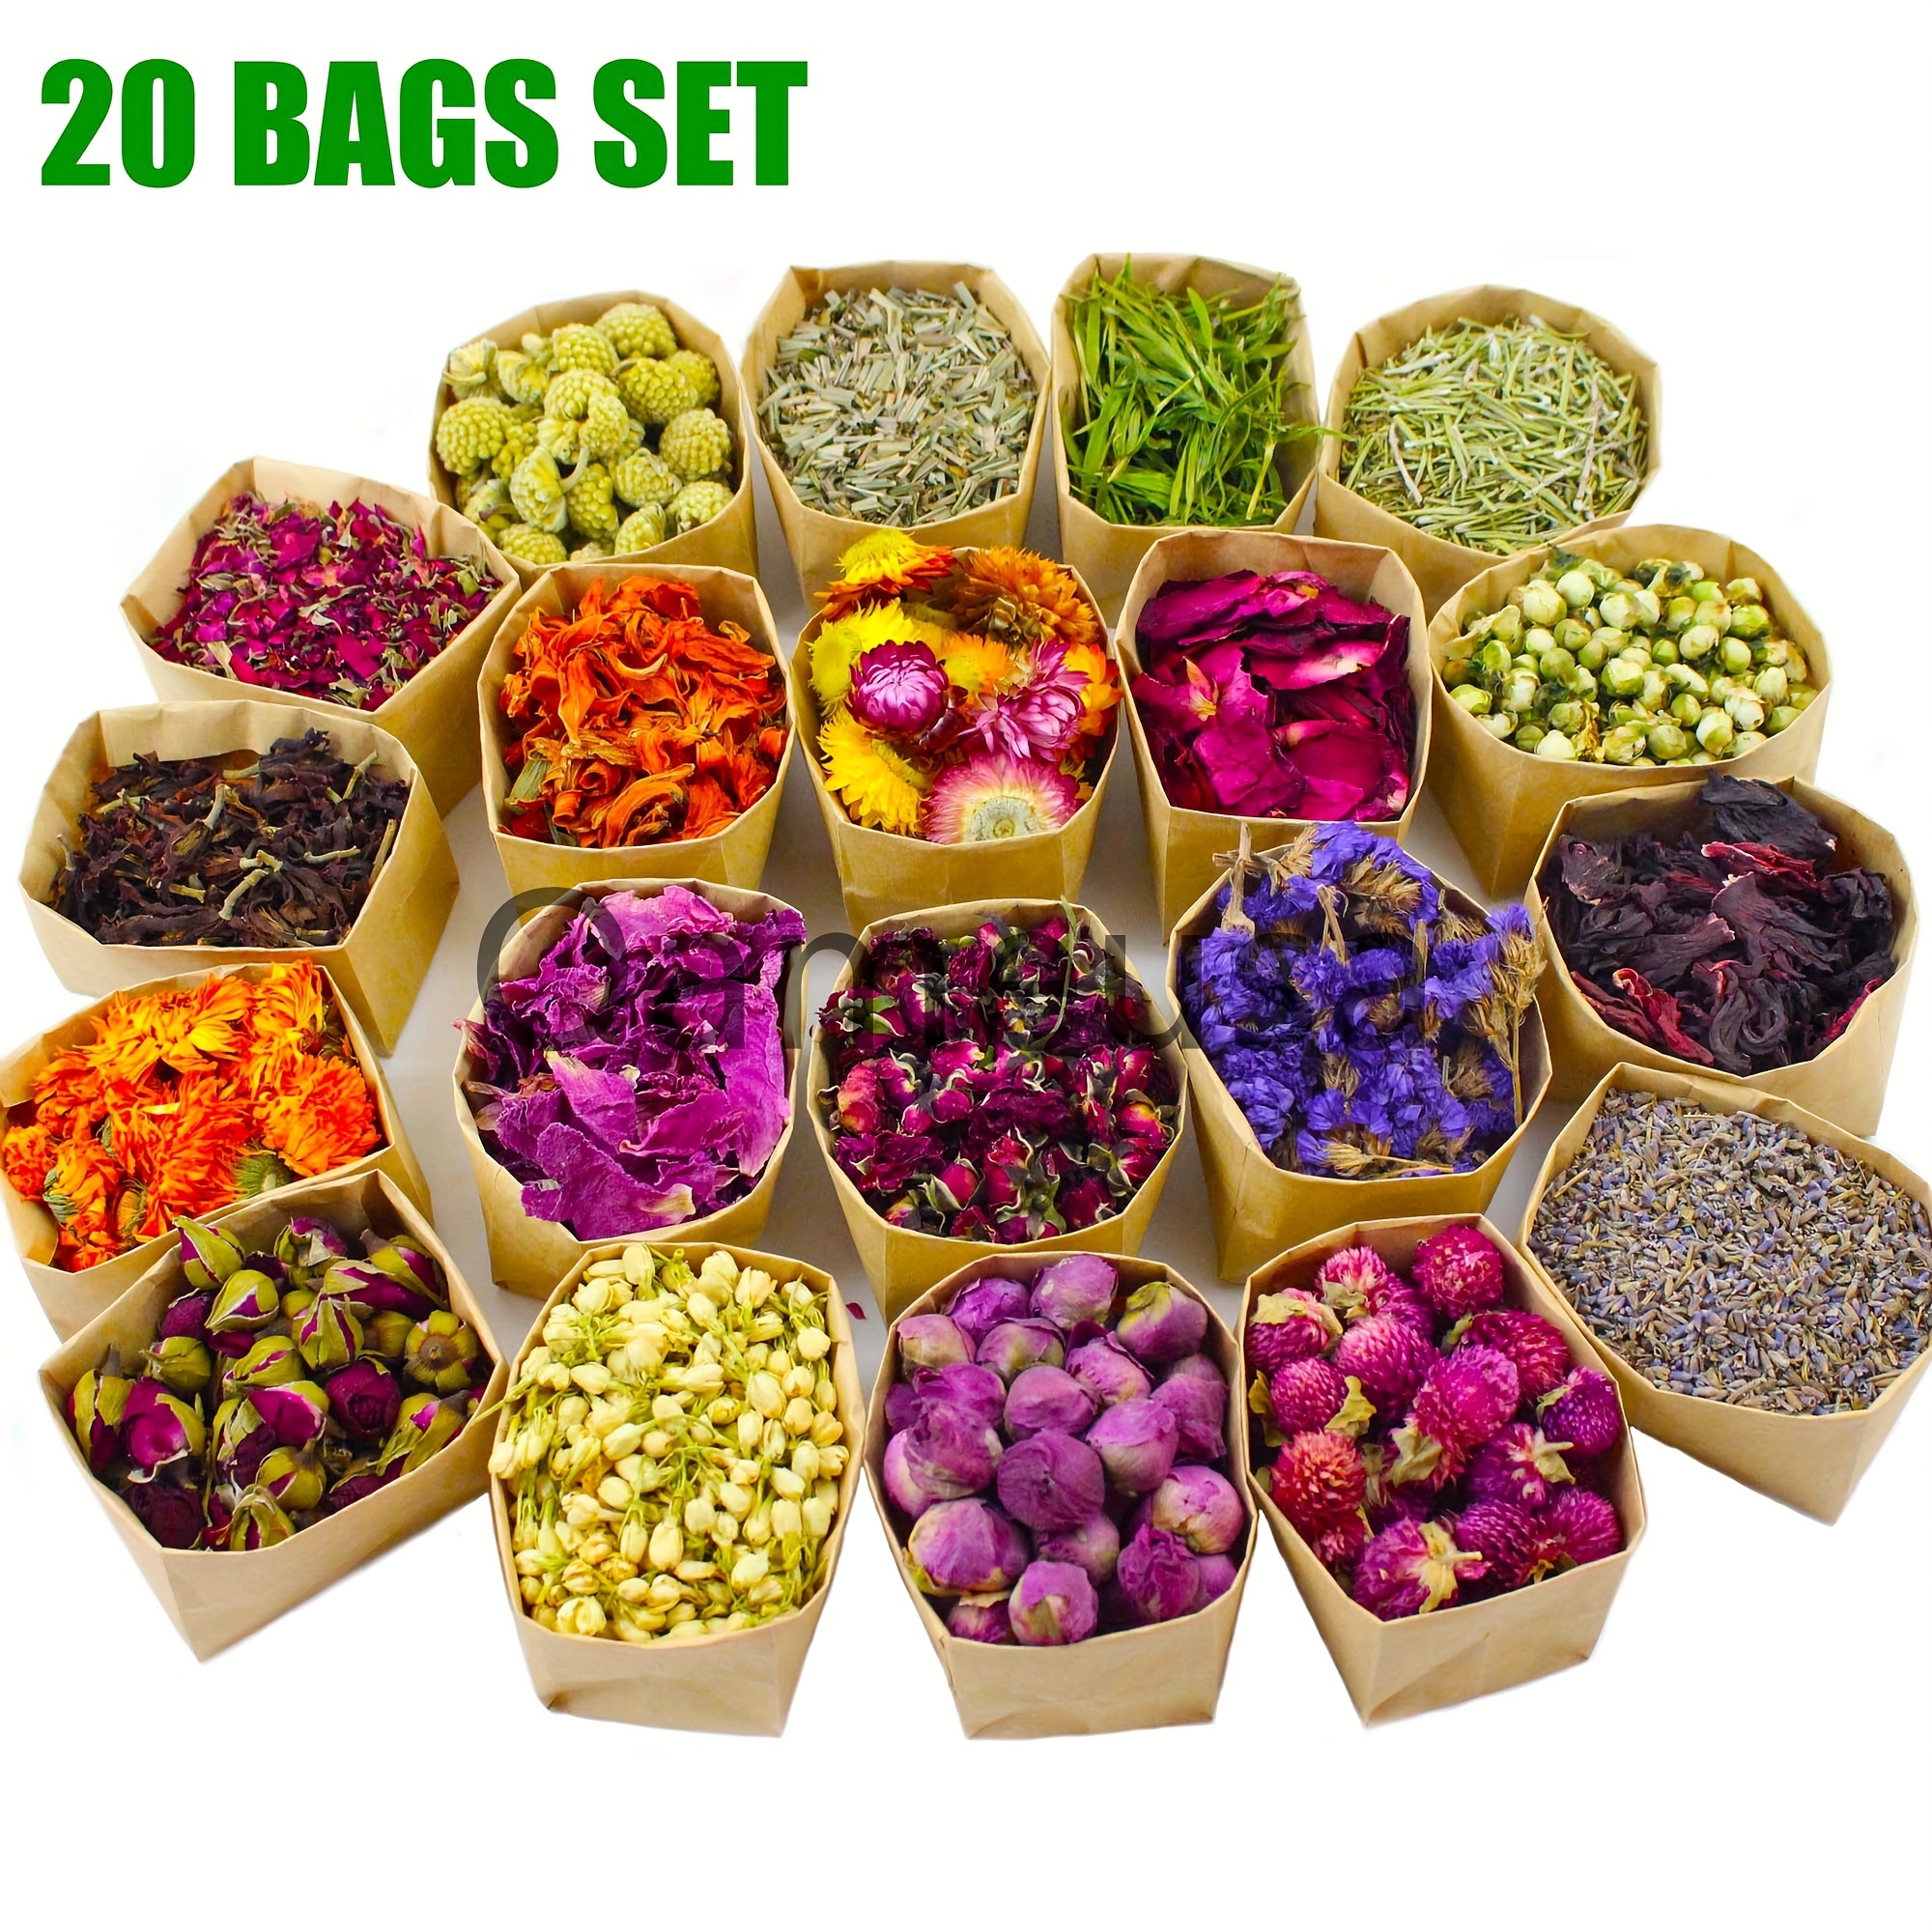 

20 Bags/set Of Dried Flowers For Diy Resin Fillers Flower Candle Making Supplies, Dried Plant-lavender, Rose, Jasmine, Peony, Chrysanthemum, Etc.